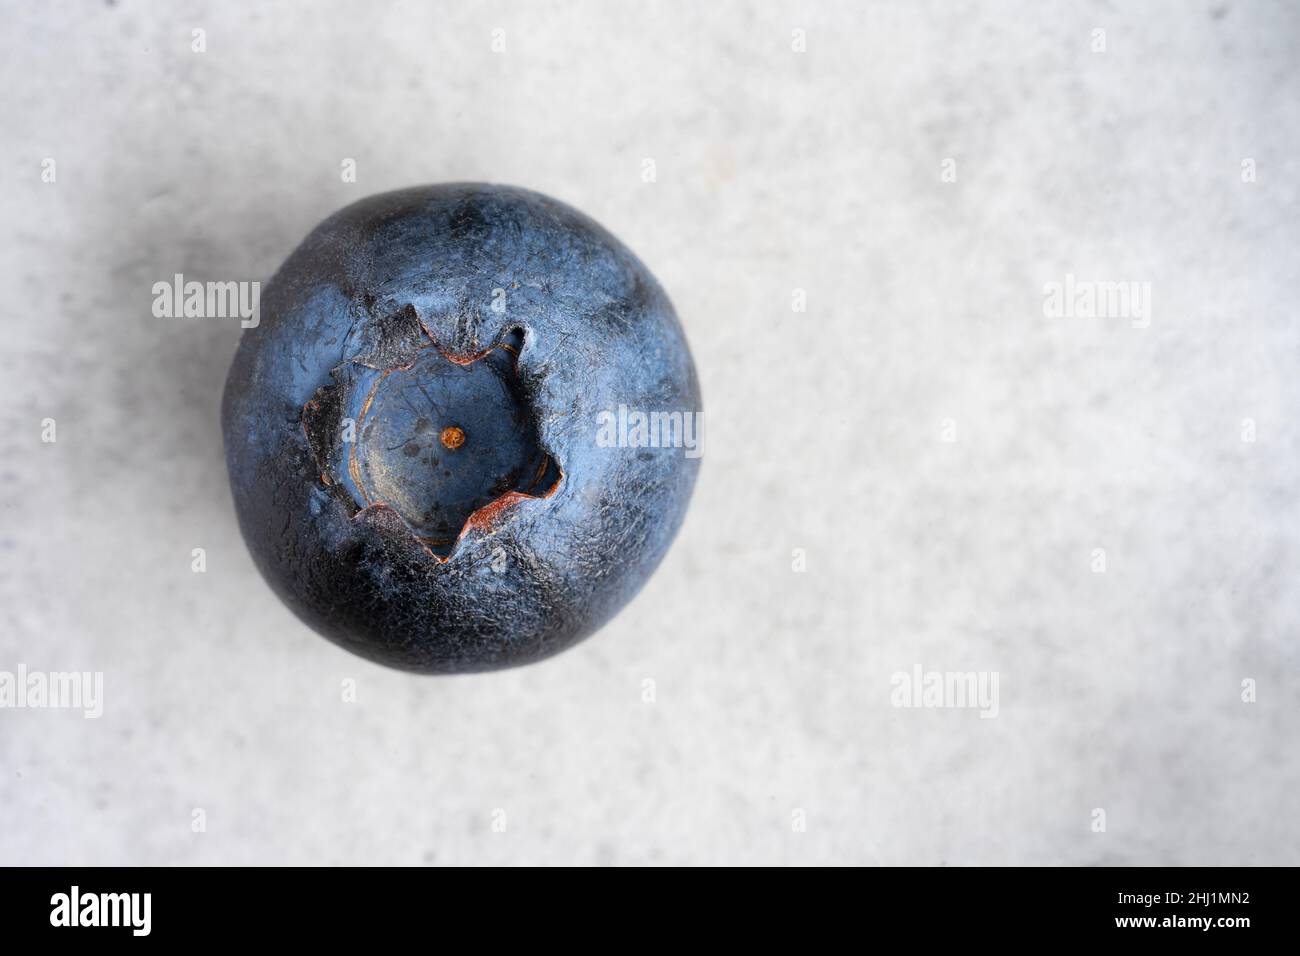 One fresh blueberry isolated on a neutral background Stock Photo